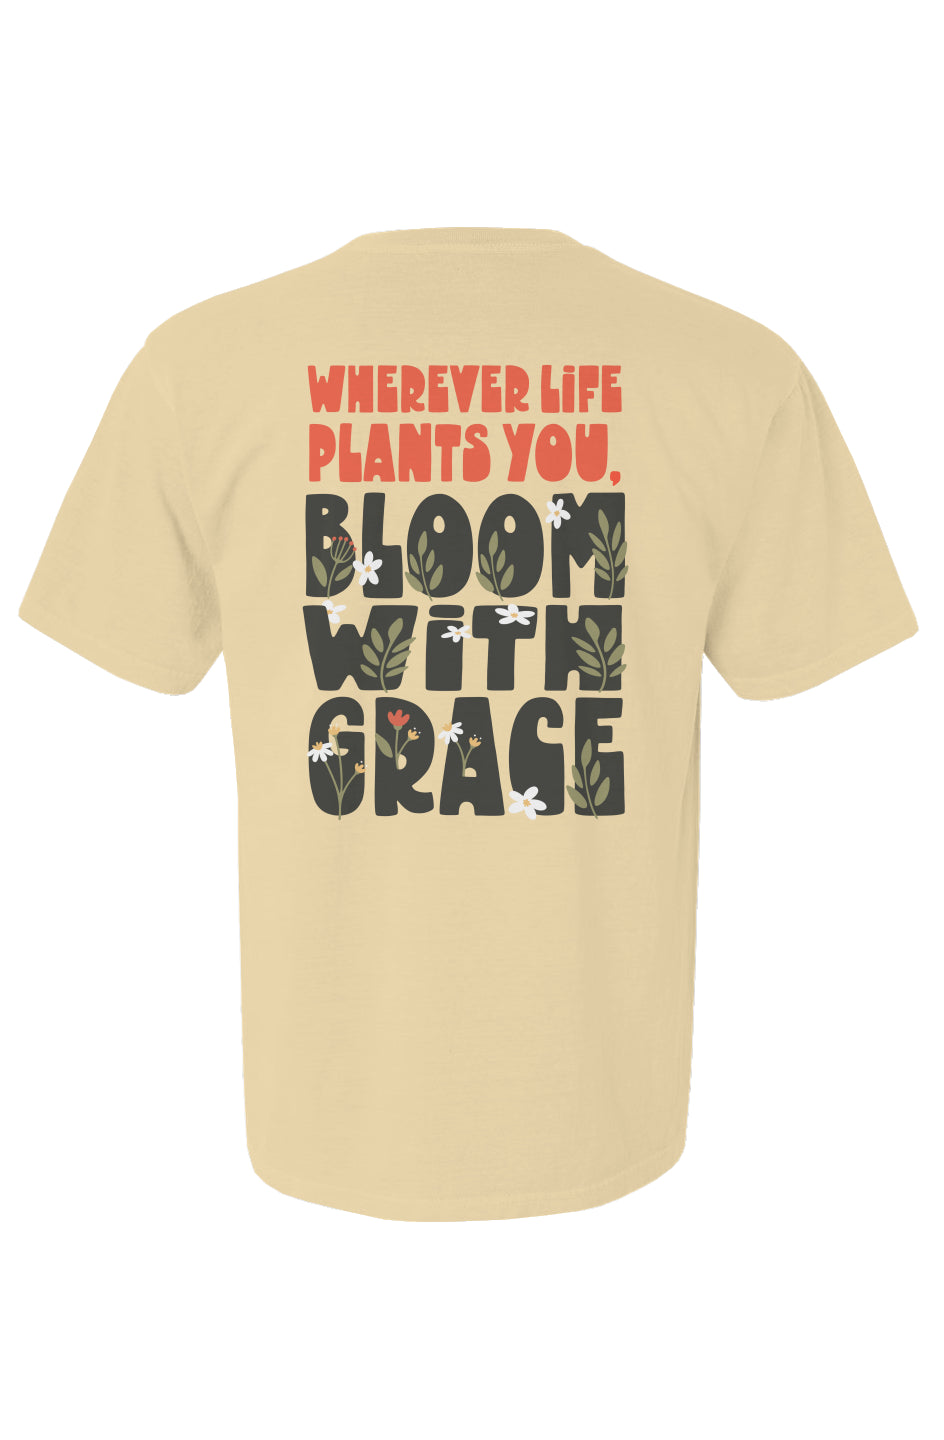 BLOOM WITH GRACE TSHIRT 